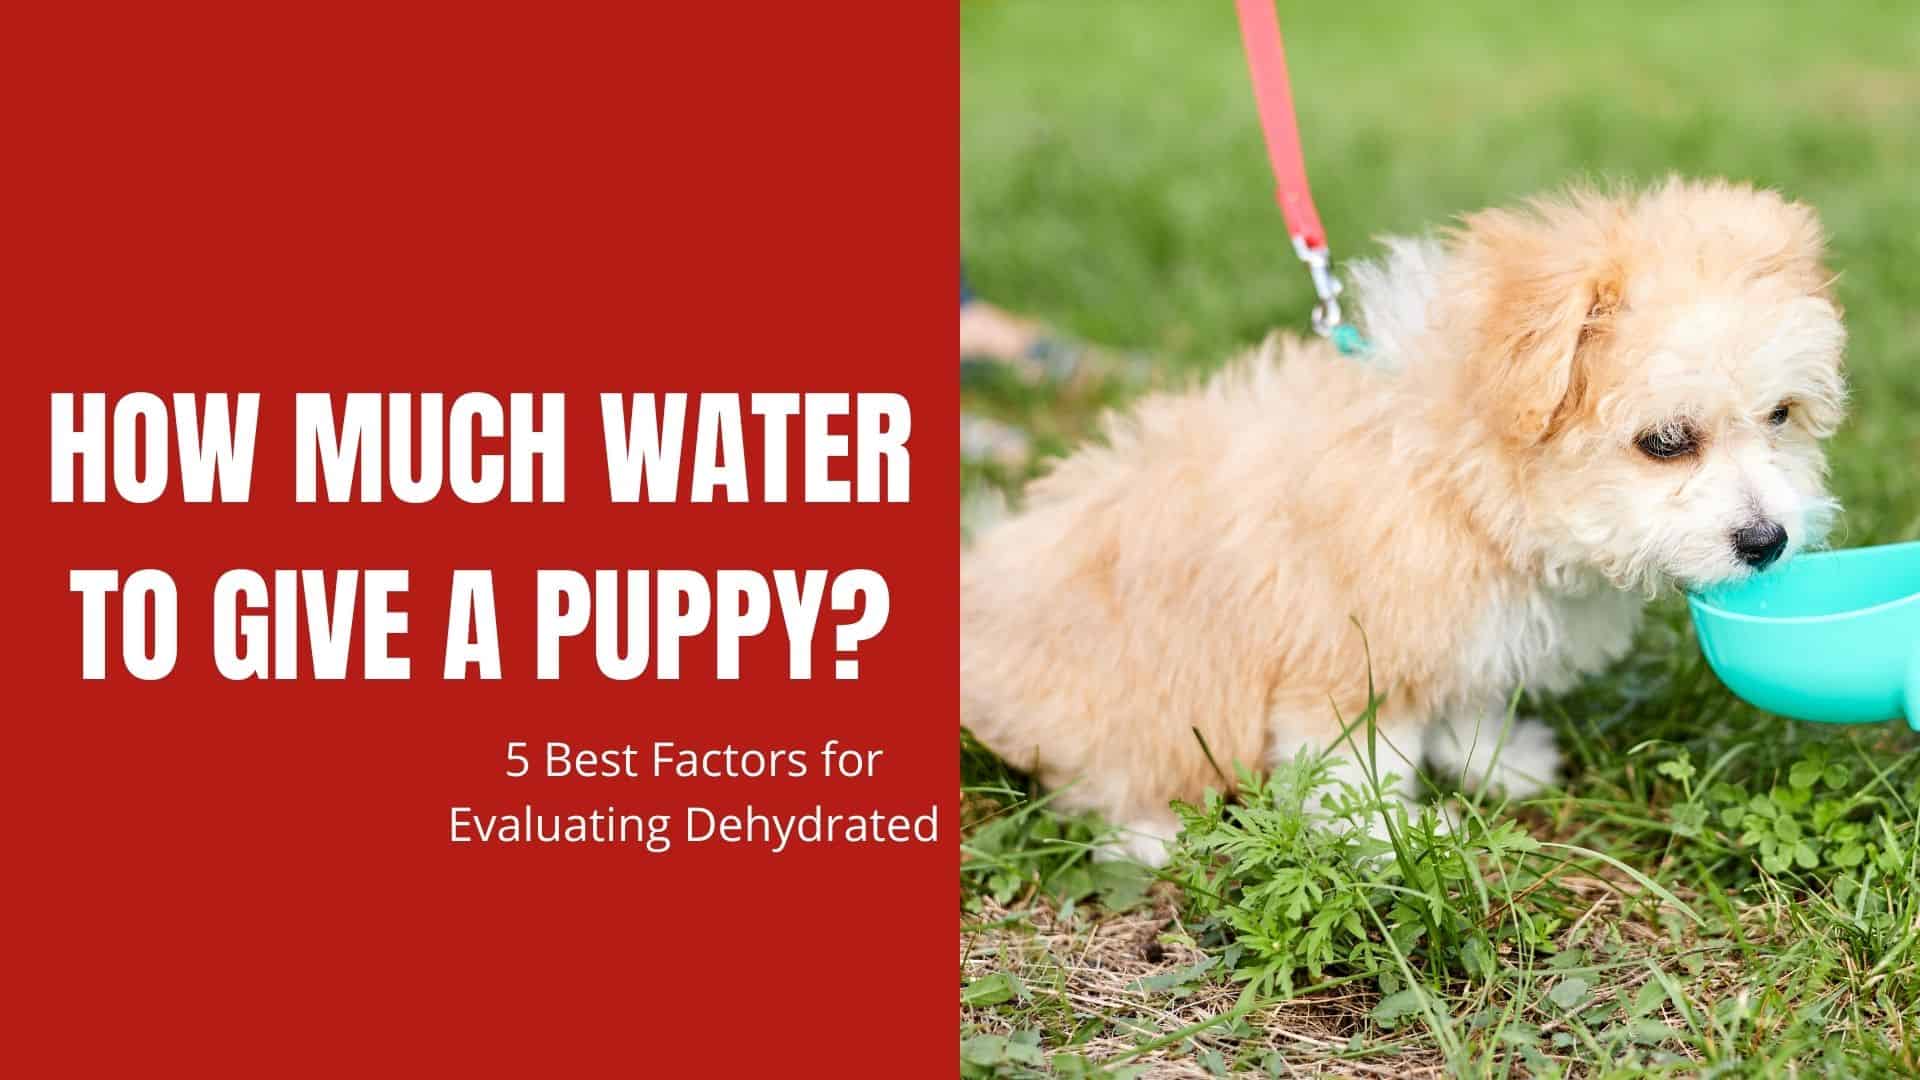 How Much Water To Give a Puppy? 5 Best Factors for Evaluating Dehydrated